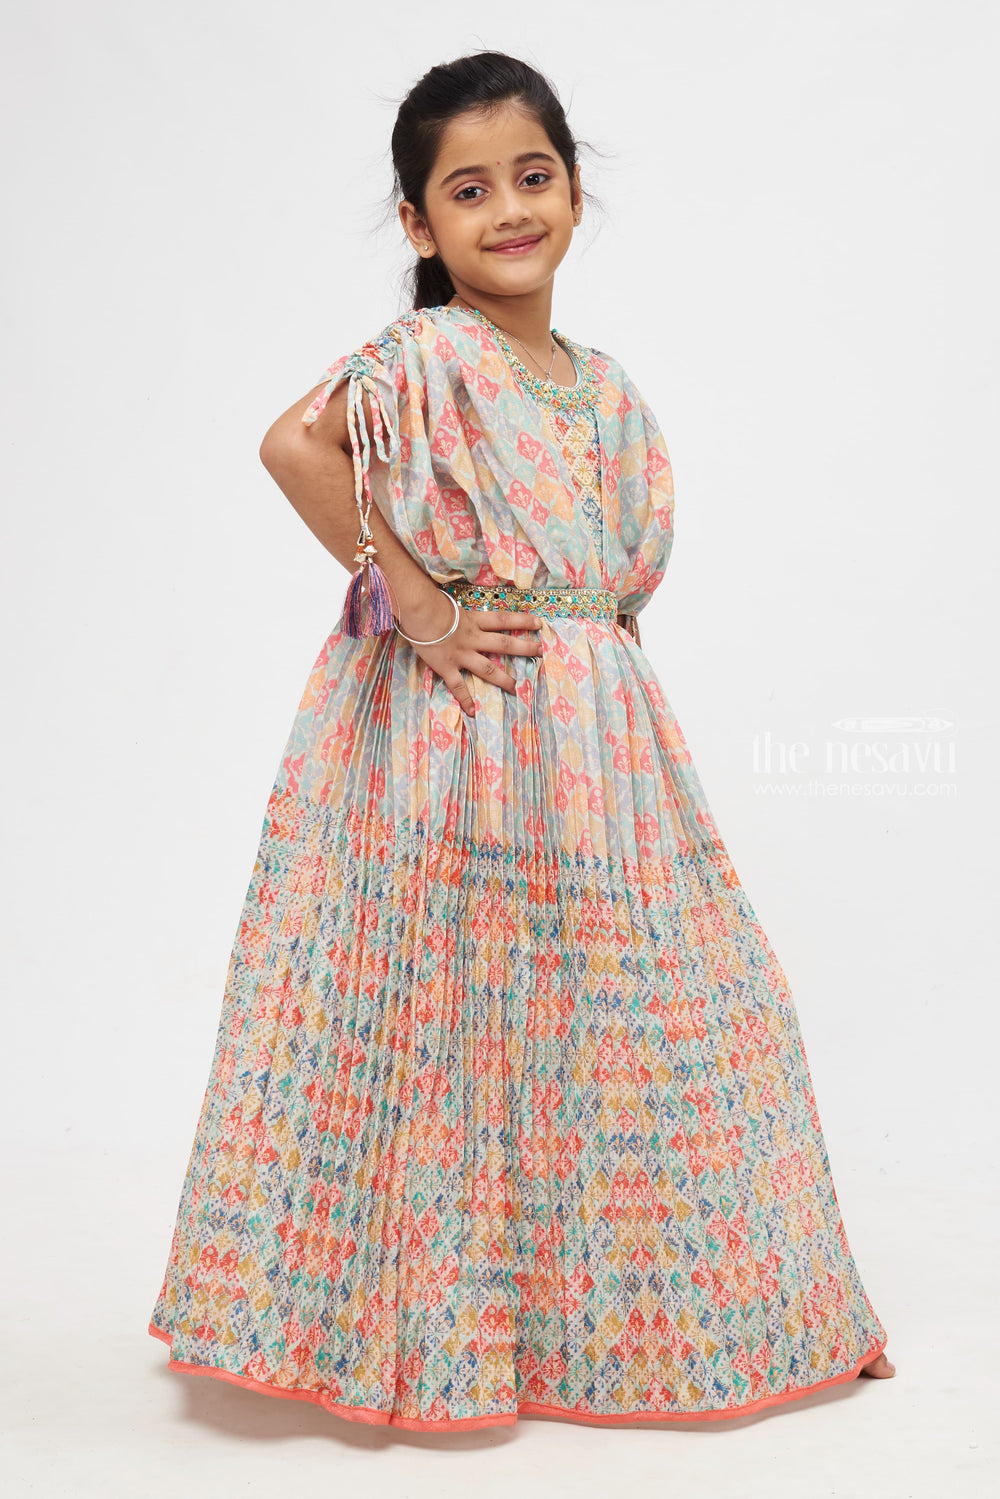 The Nesavu Girls Party Gown Bohemian Bliss: Multicolored Geometric Mosaic Anarkali with Bejeweled Neckline and Tassel Accents Nesavu Elegance Reimagined | Premium Anarkali Gowns Collection | The Nesavu